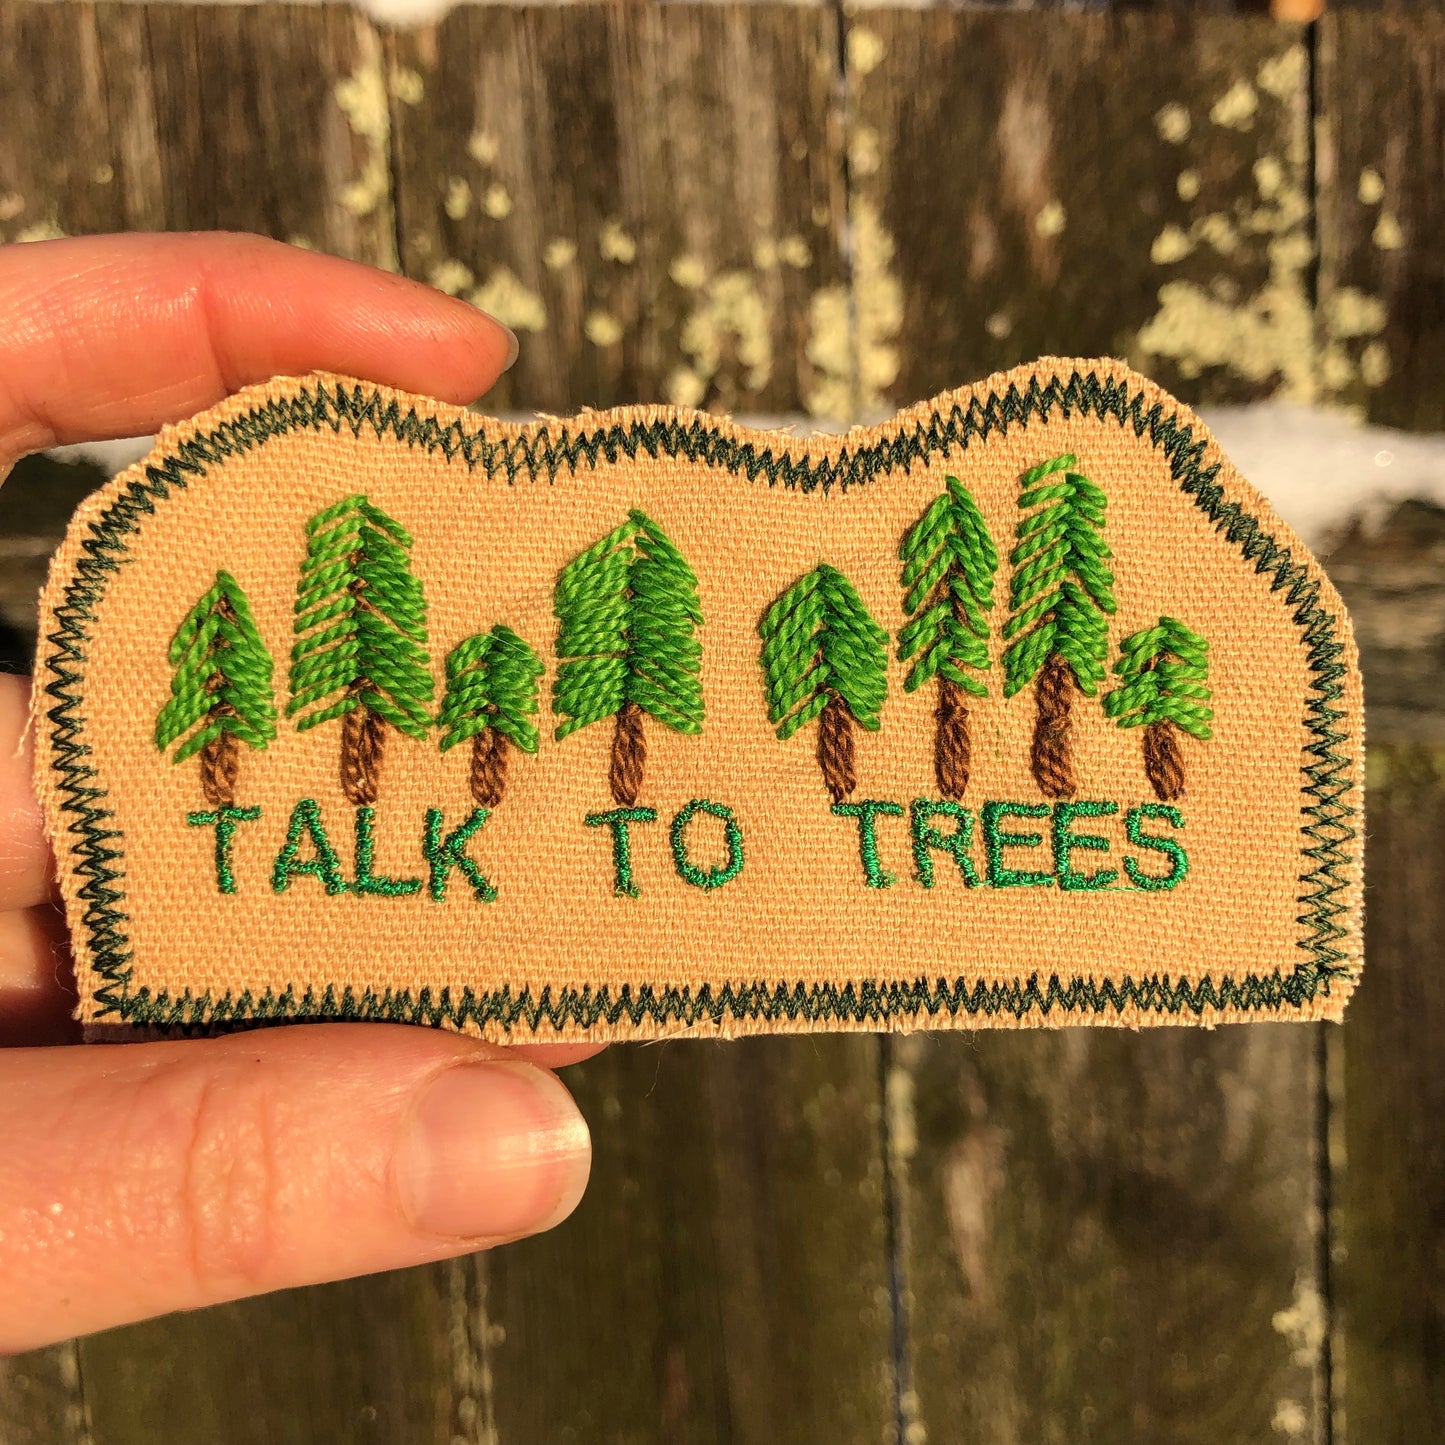 Talk to Trees - Handmade Embroidered Canvas Patch